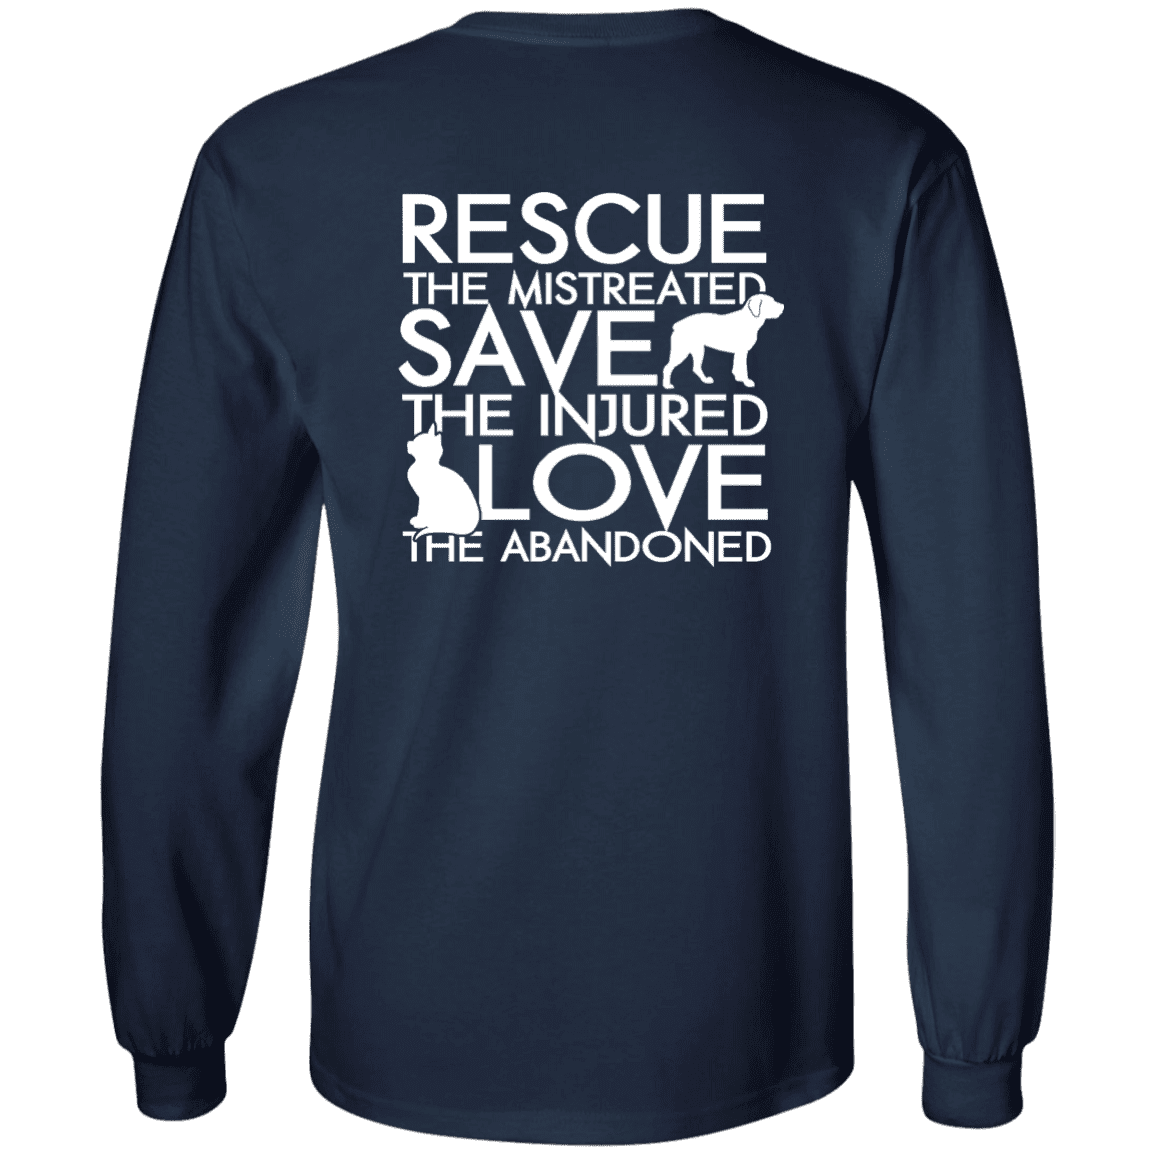 Rescue Save Love - Long Sleeve T Shirt.